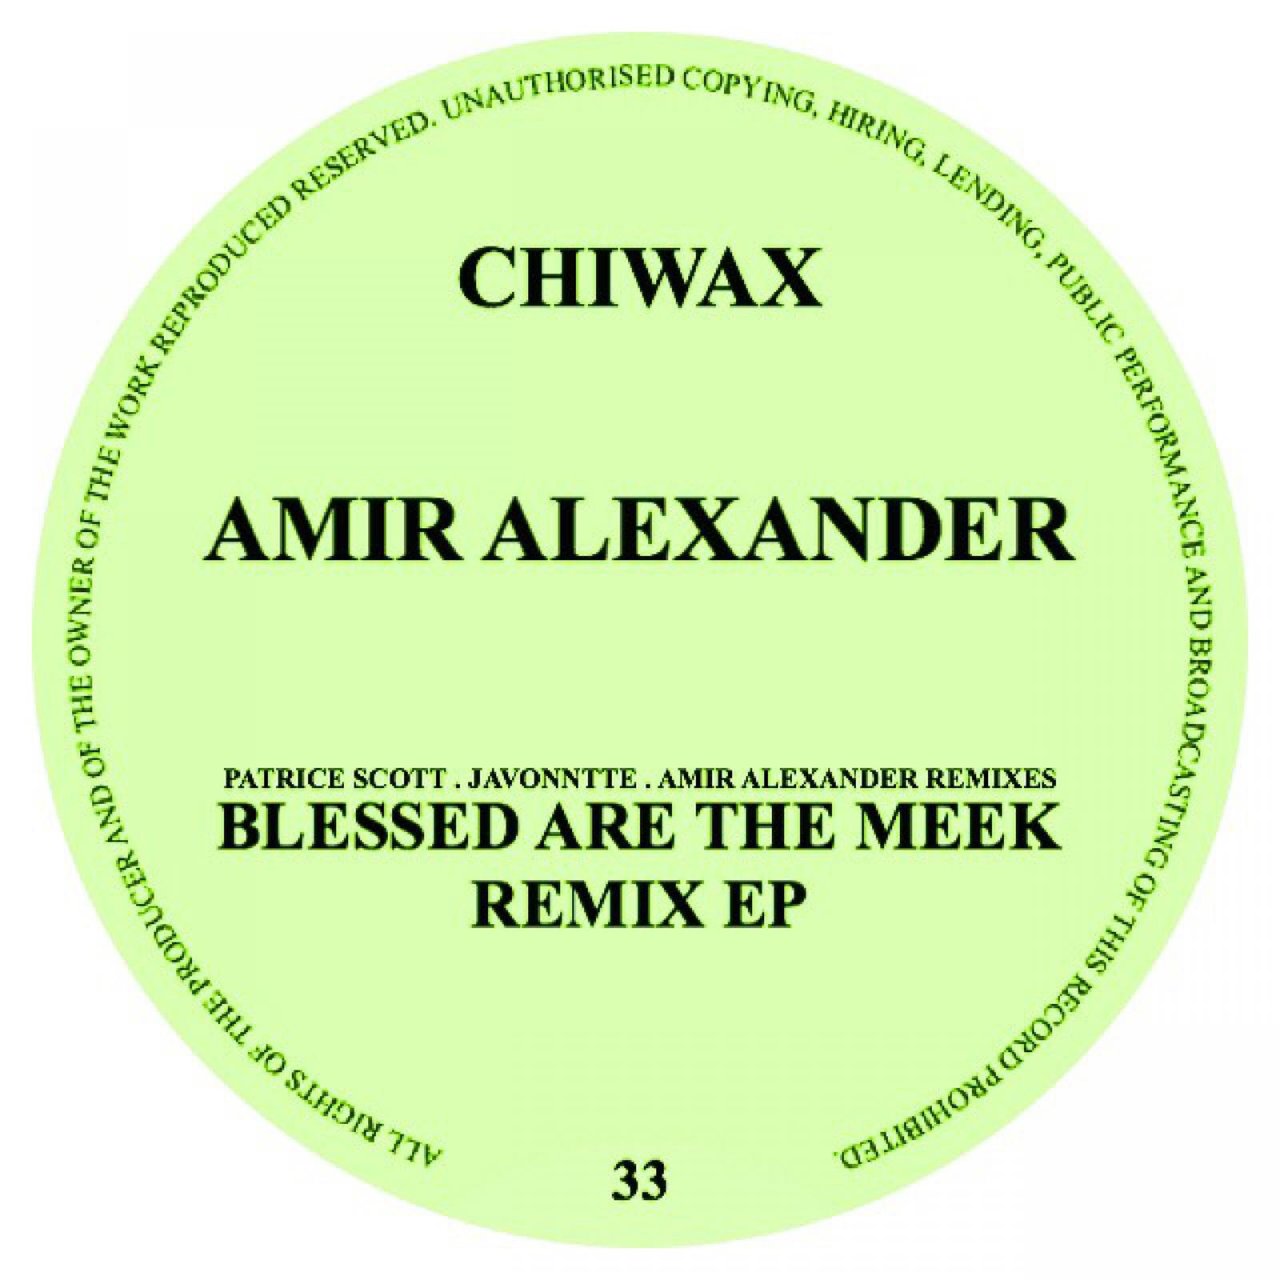 Amir Alexander - Blessed Are The Meek Remix EP [CHIWAX033]